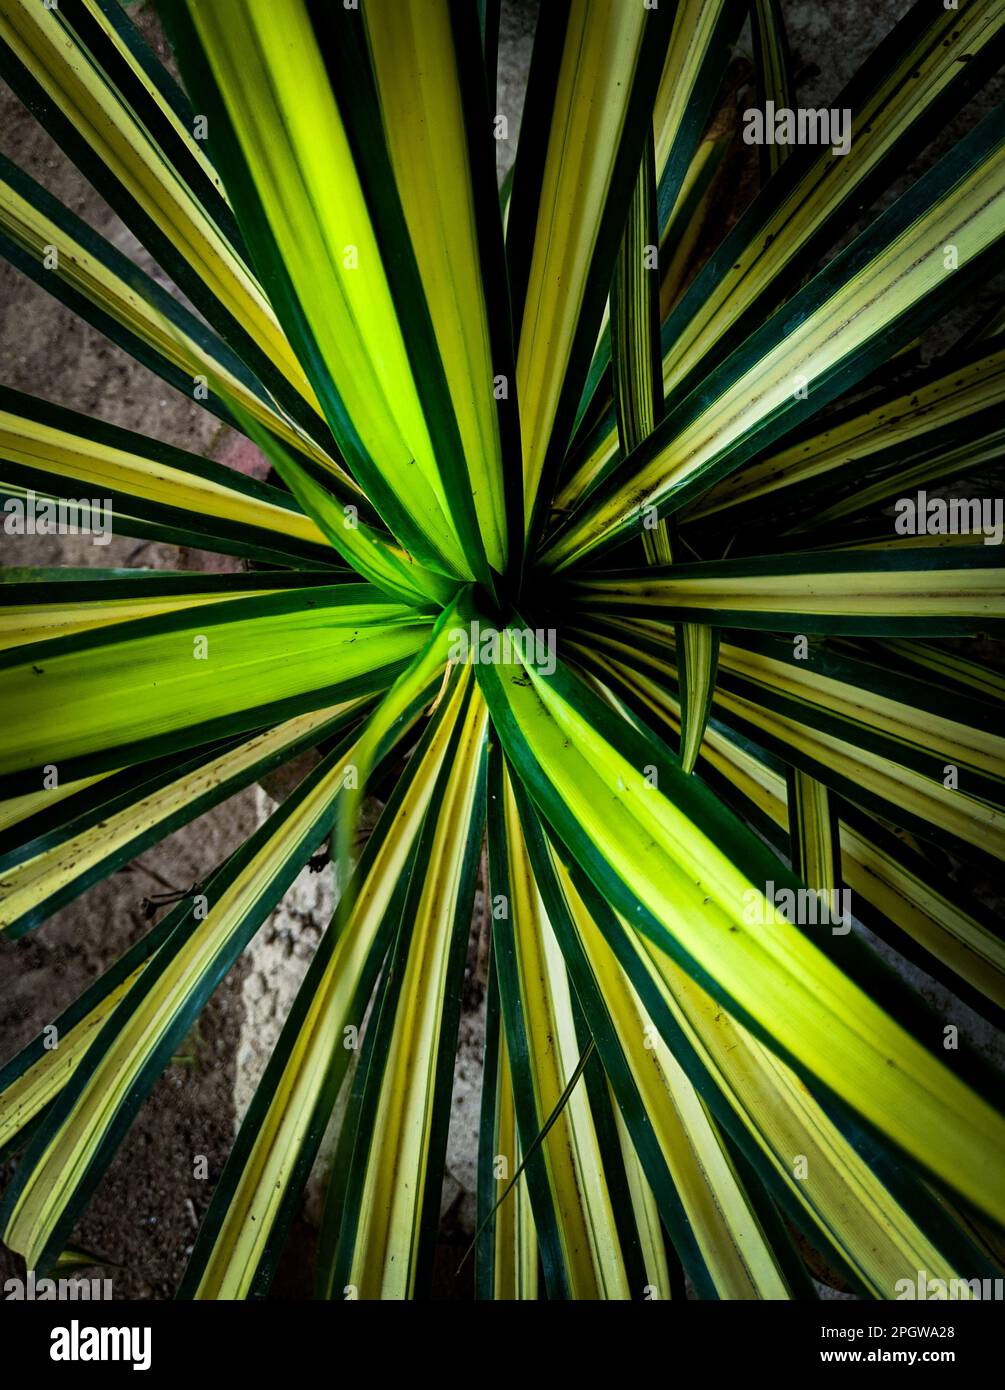 A top view of a variegated yucca plant with yellow stripes Stock Photo